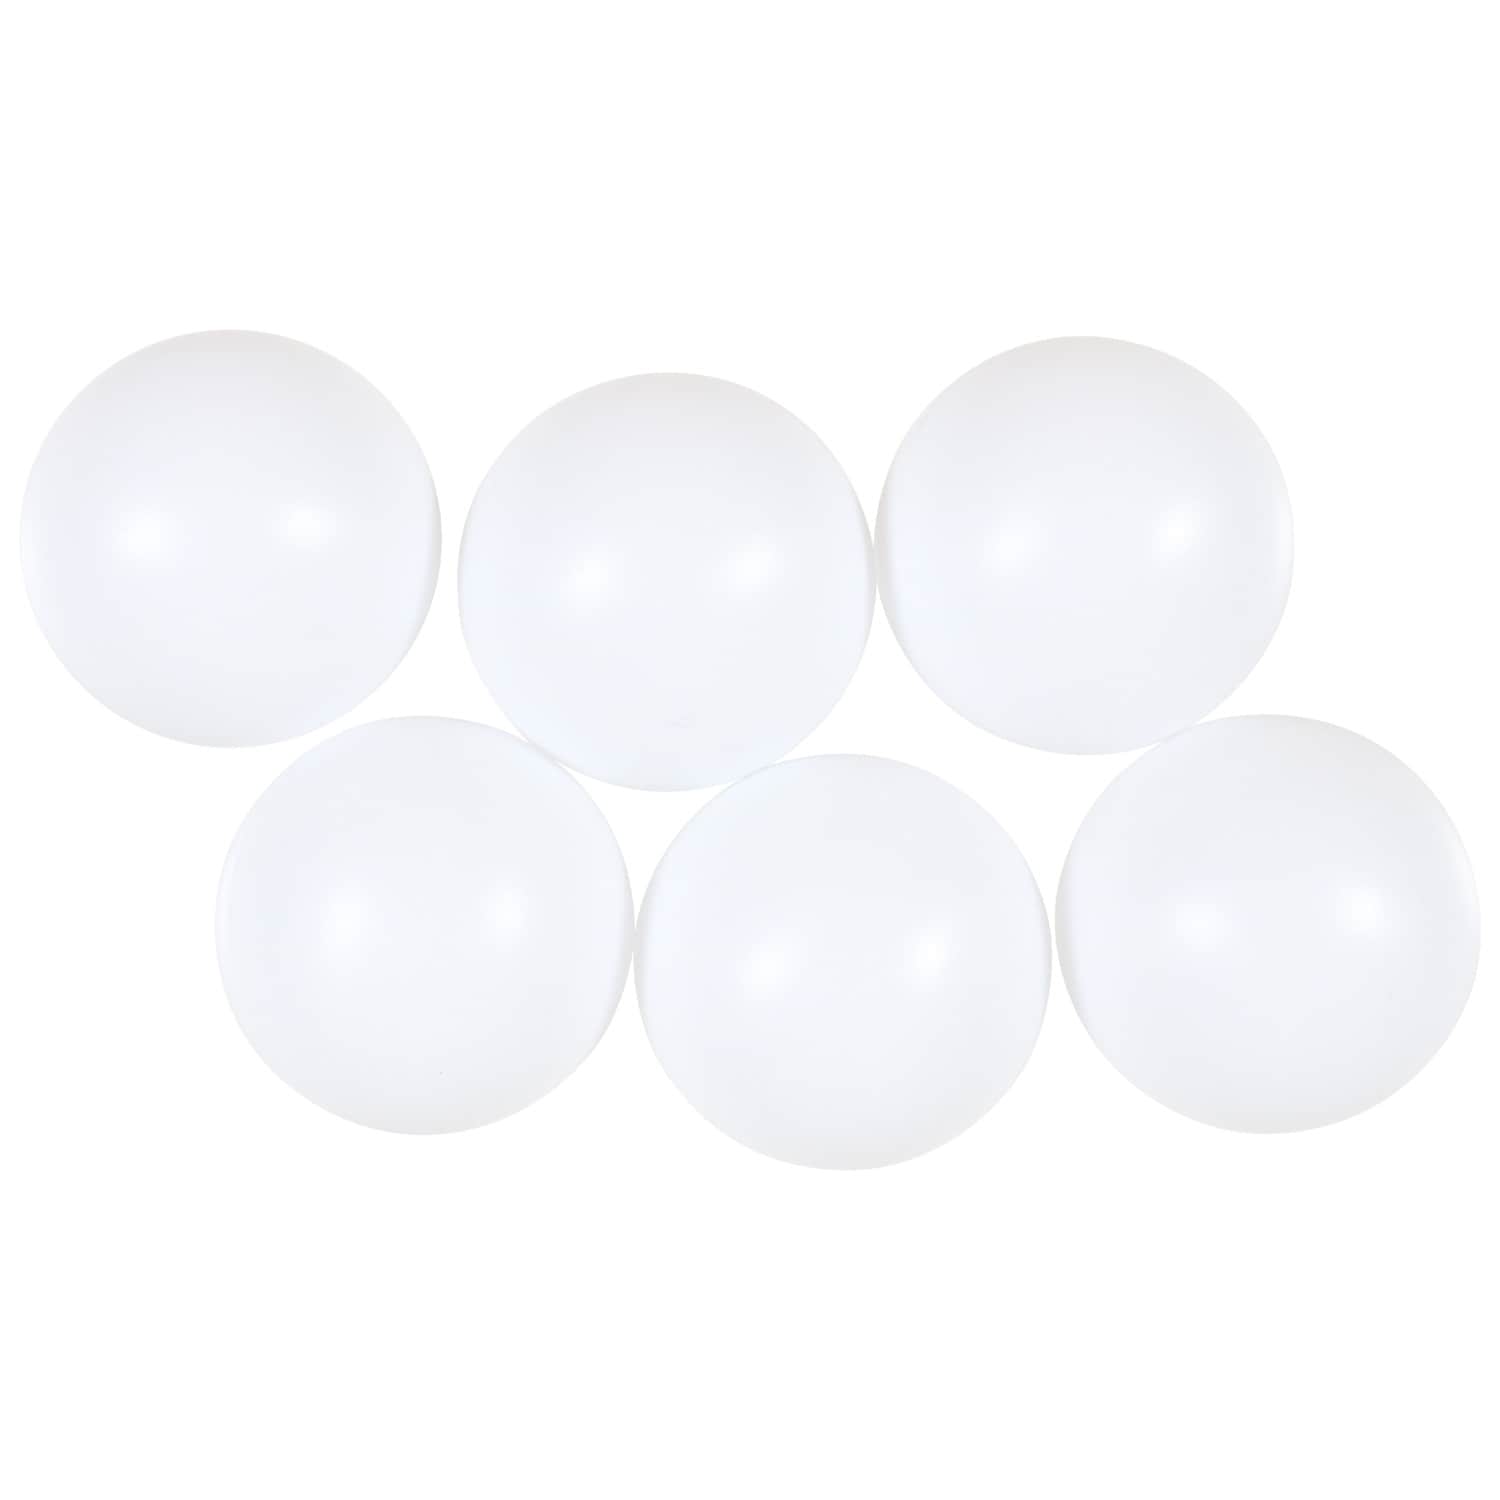 All-Star Sports Plastic Table Tennis Ping Pong Balls 6-Count Pack For Ages 6+ 